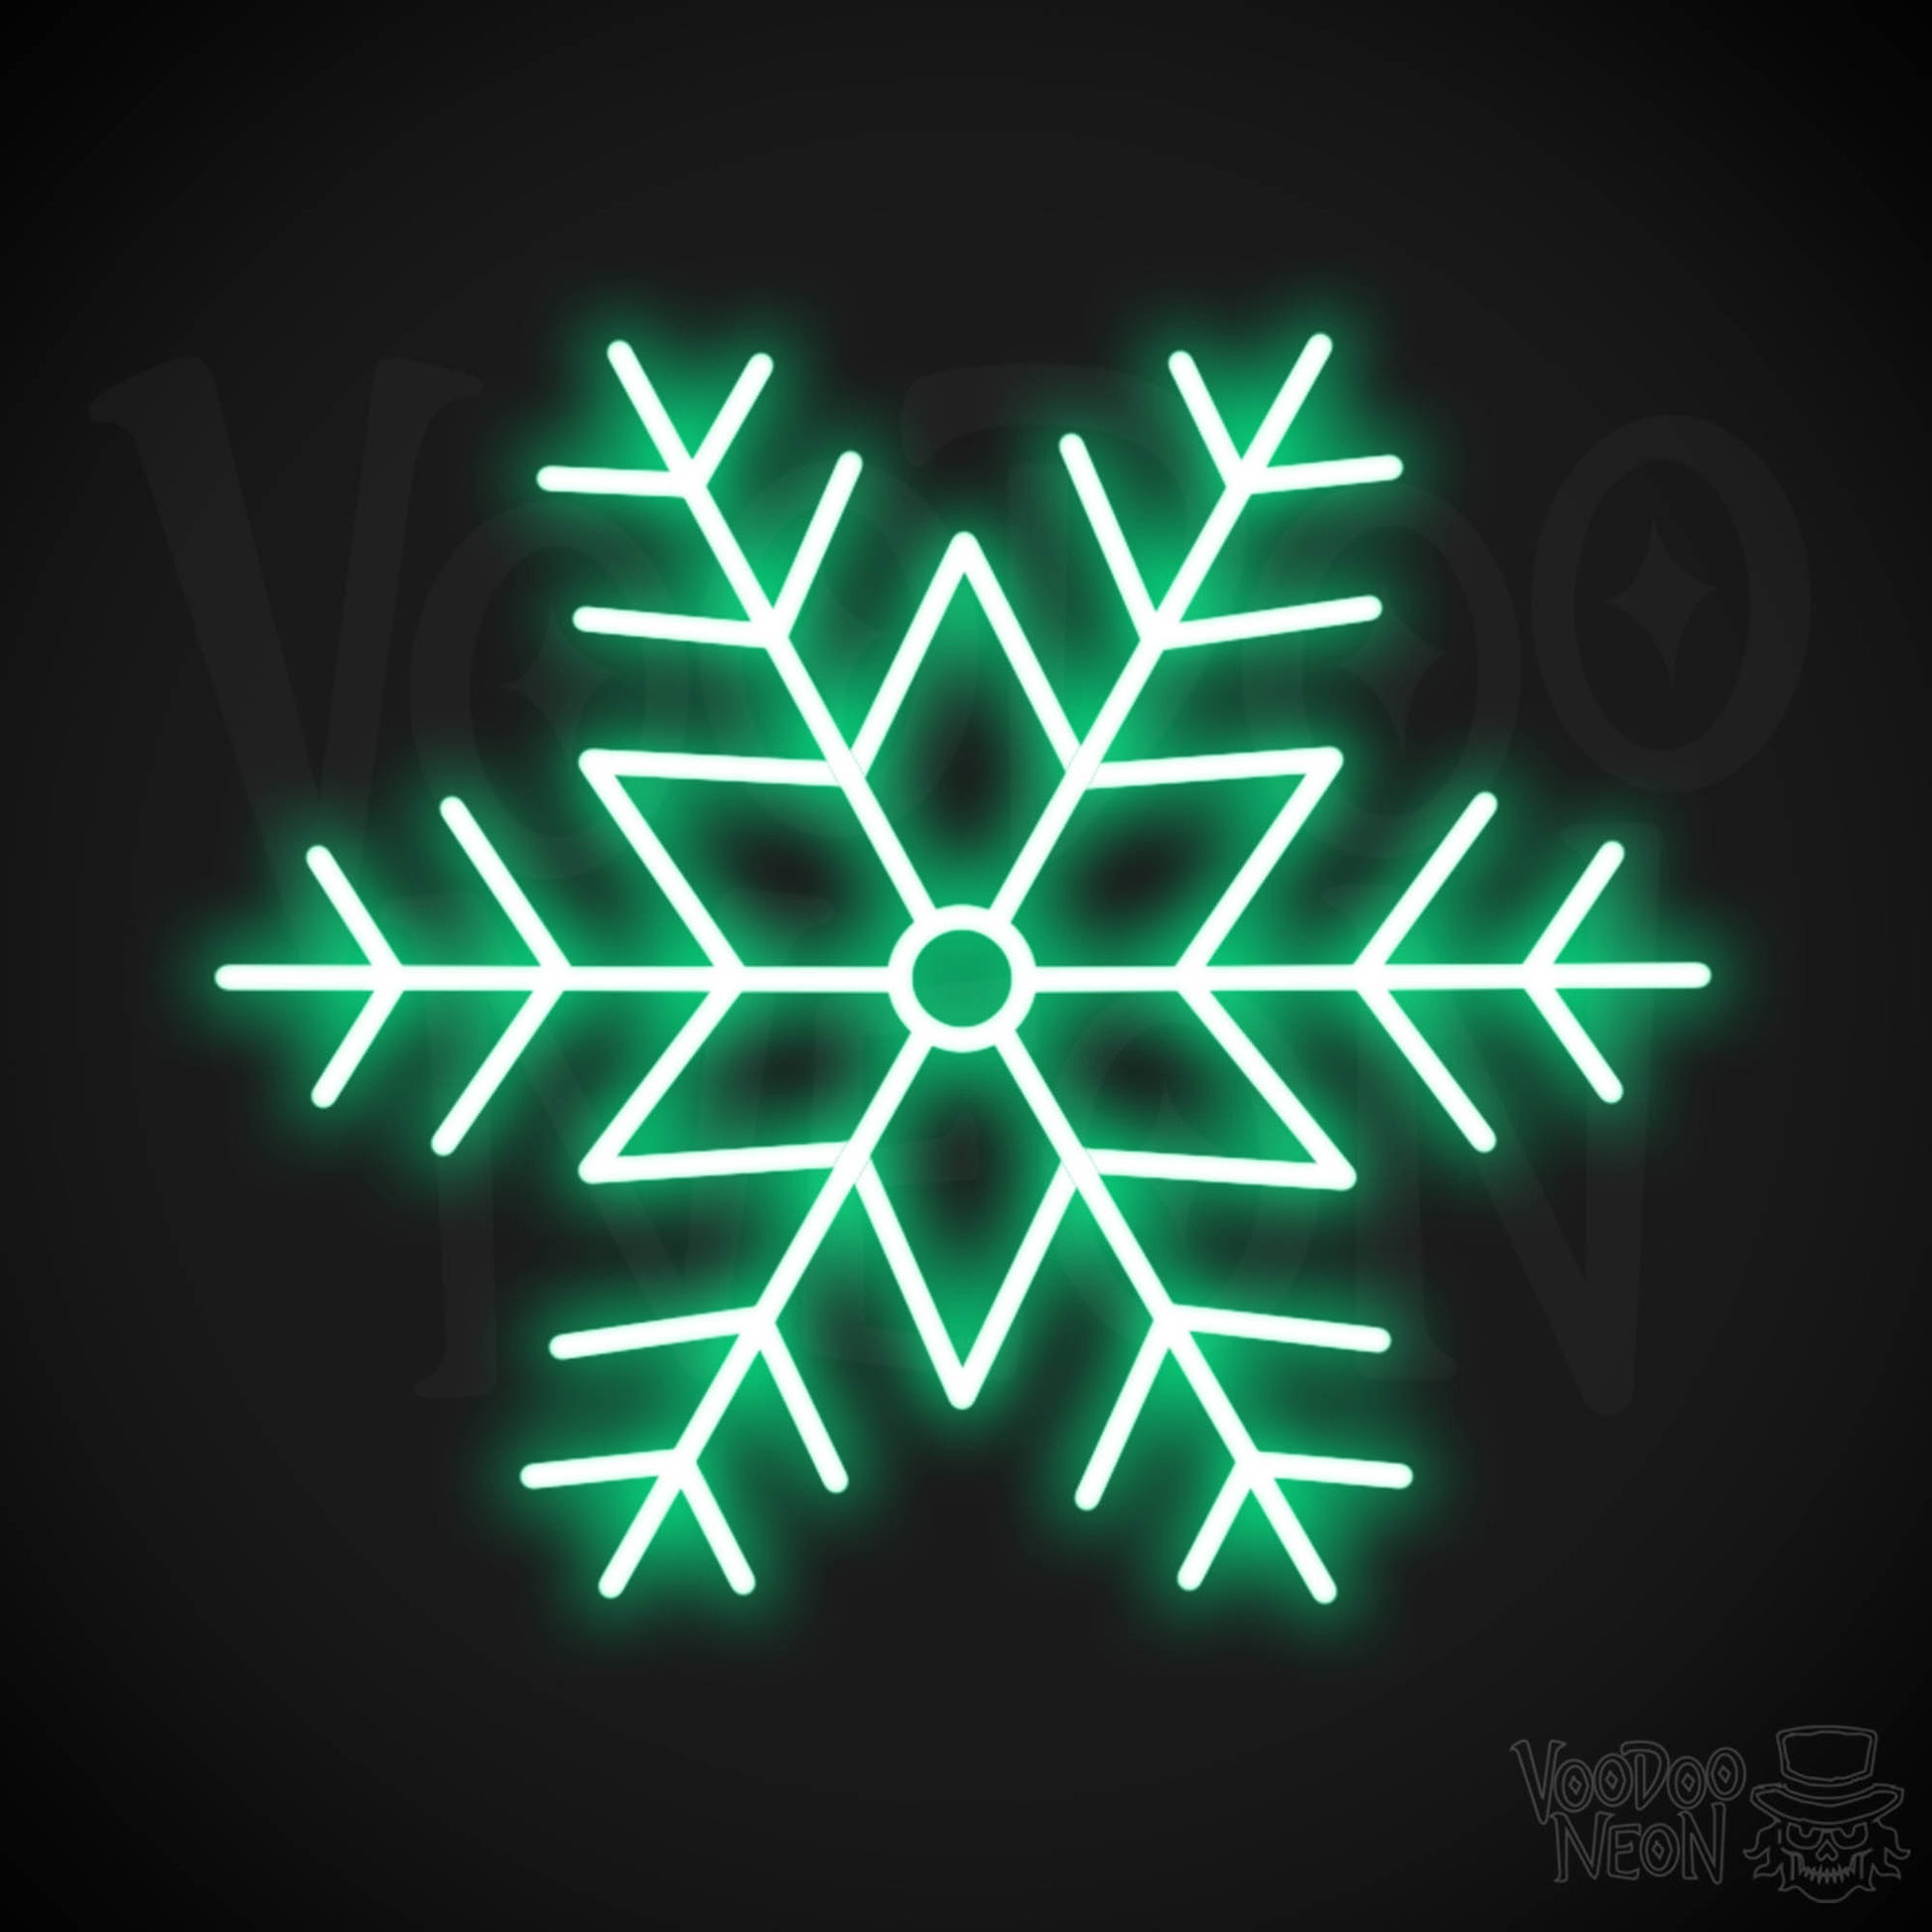 Snow Flakes Neon Sign - Neon Snow Flakes Sign - Xmas LED Wall Art - Color Green